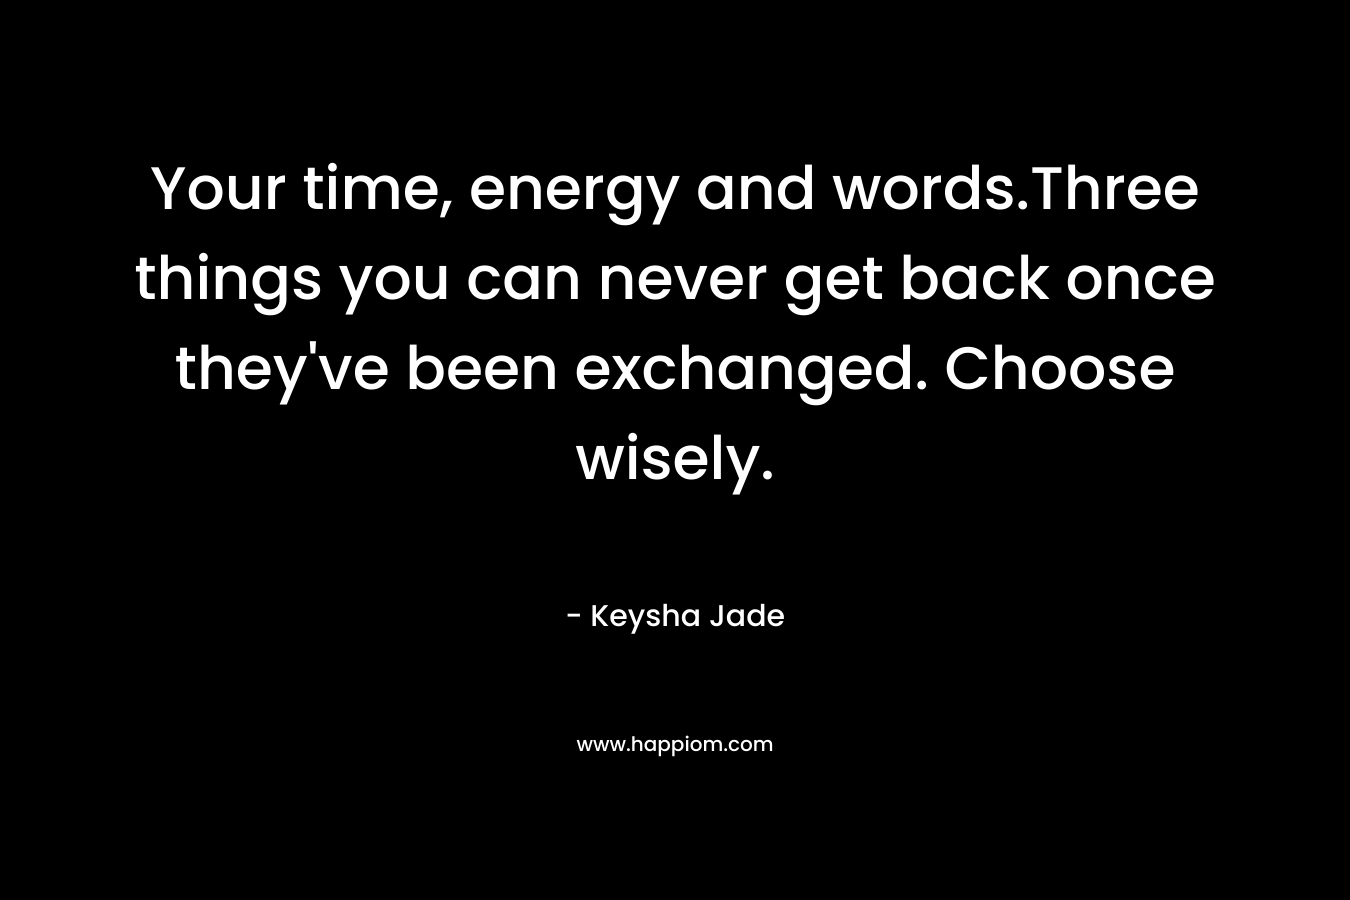 Your time, energy and words.Three things you can never get back once they've been exchanged. Choose wisely.